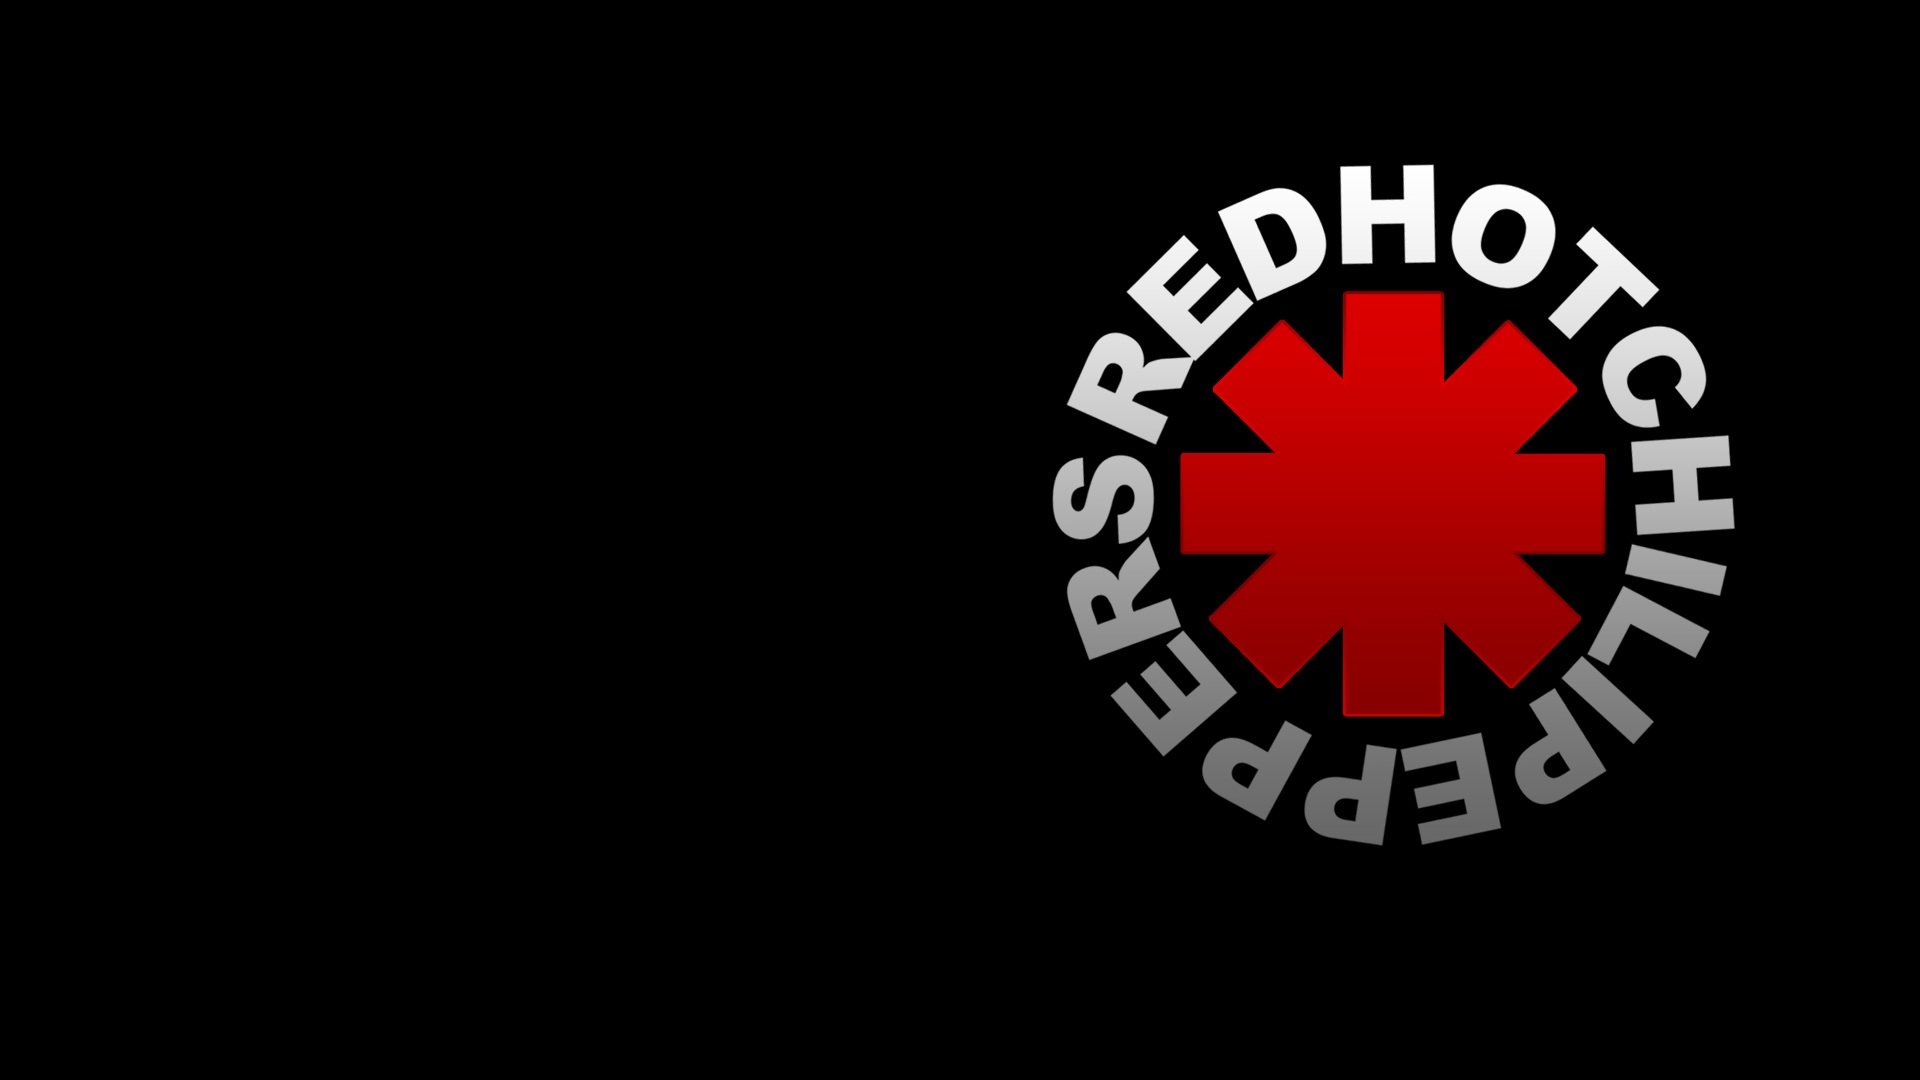 RHCP Wallpaper  Rhcp Red hot chili peppers Red hot chili peppers logo